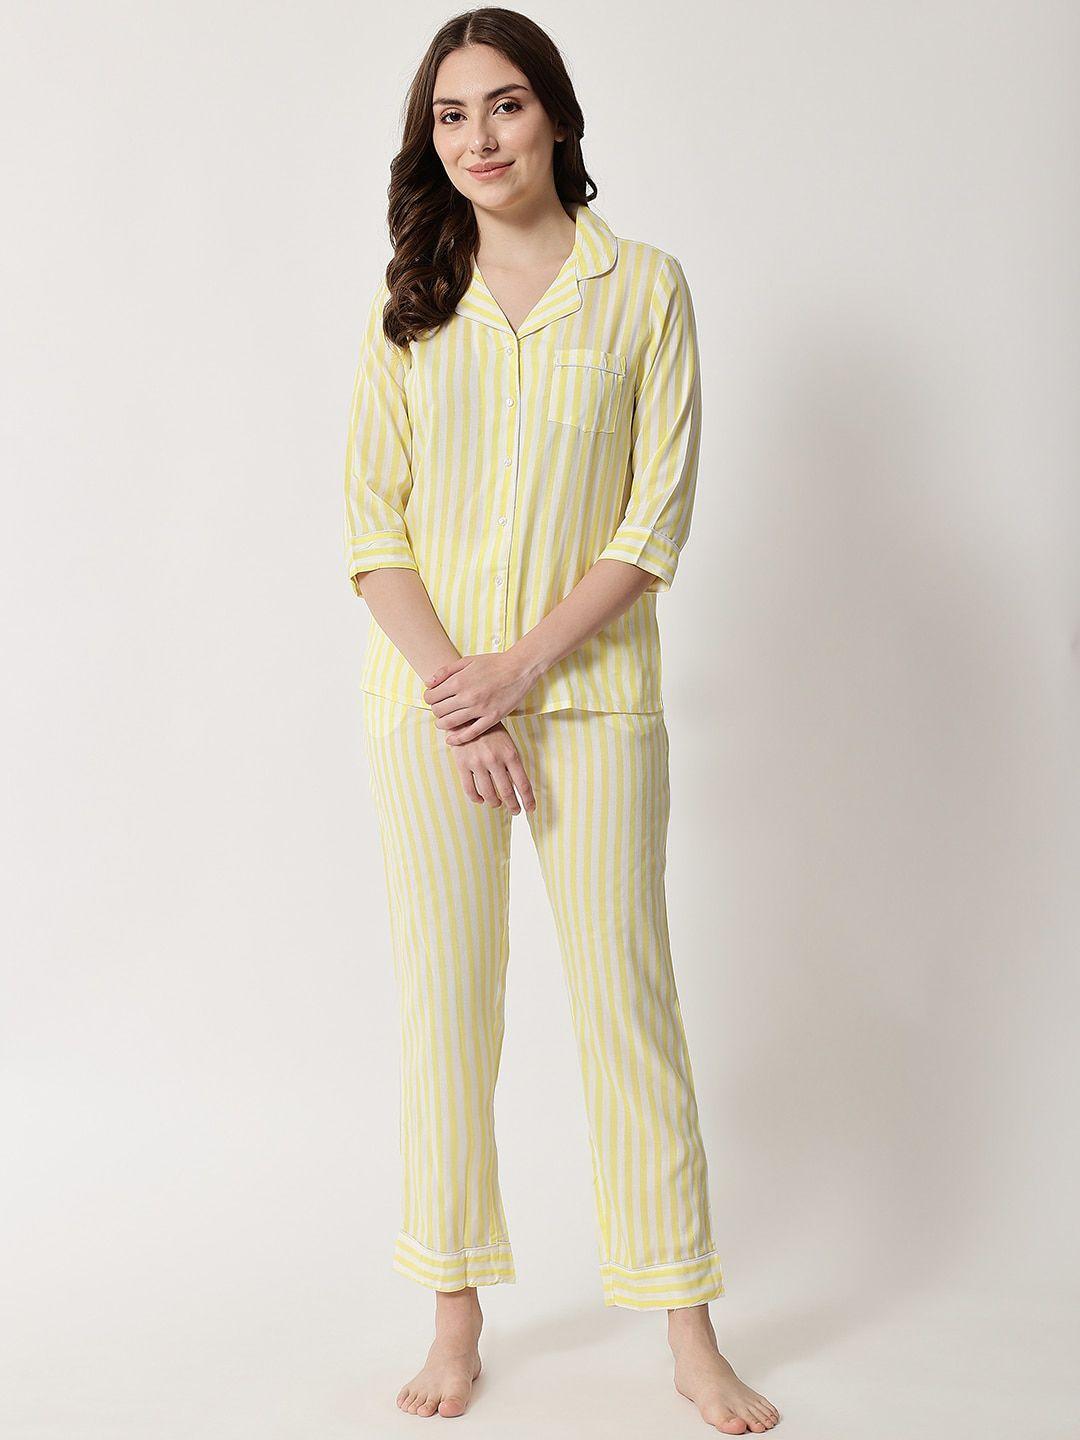 here&now-women-yellow-&-white-striped-night-suit